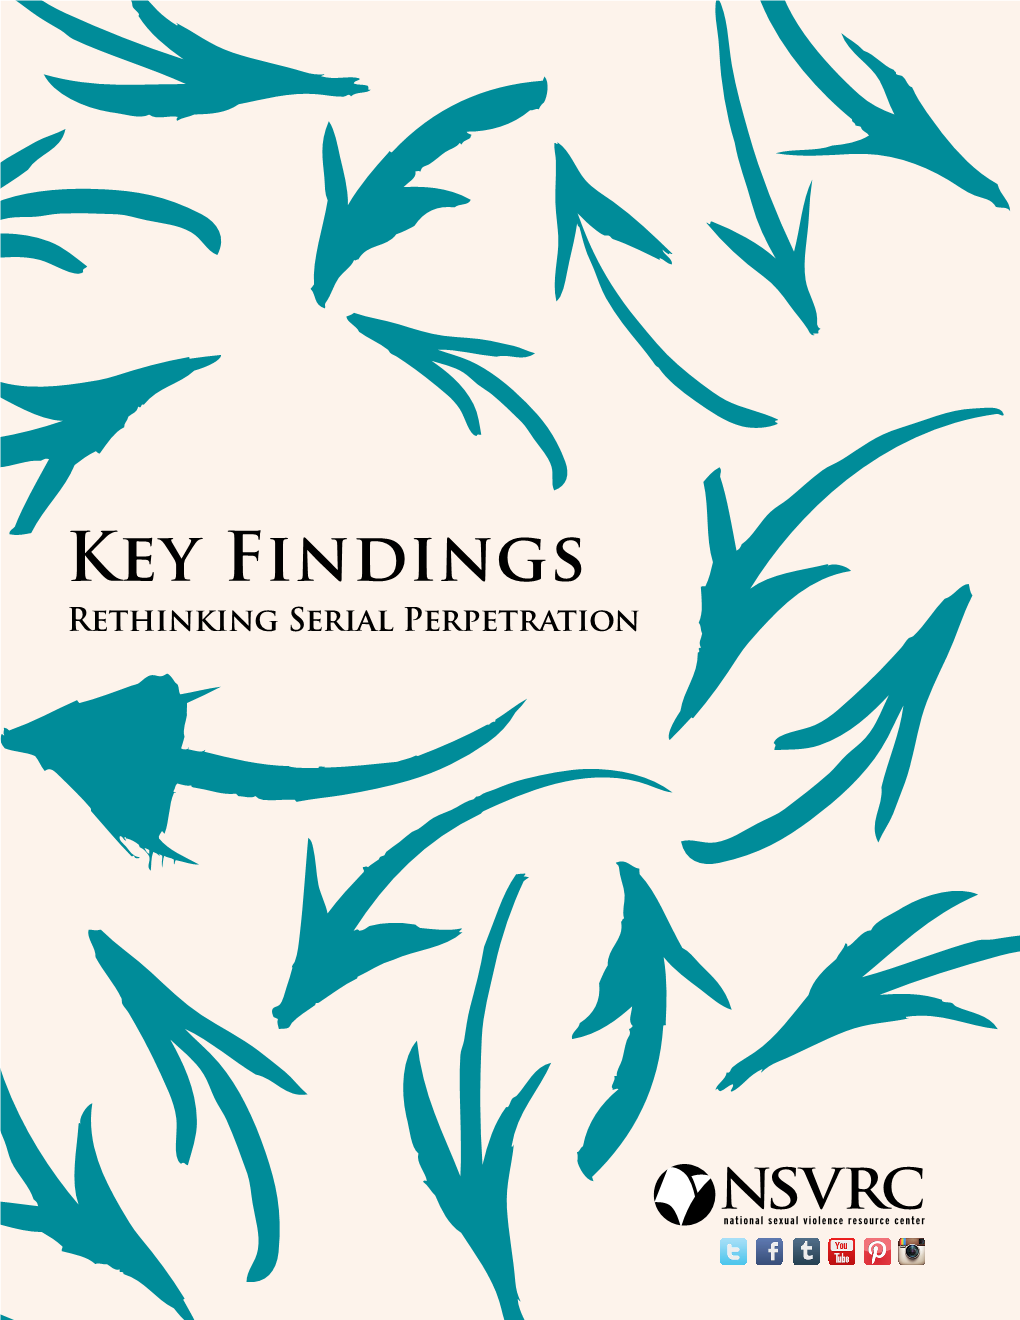 Key Findings: Rethinking Serial Perpetration.” This Guide Is Available by Visiting